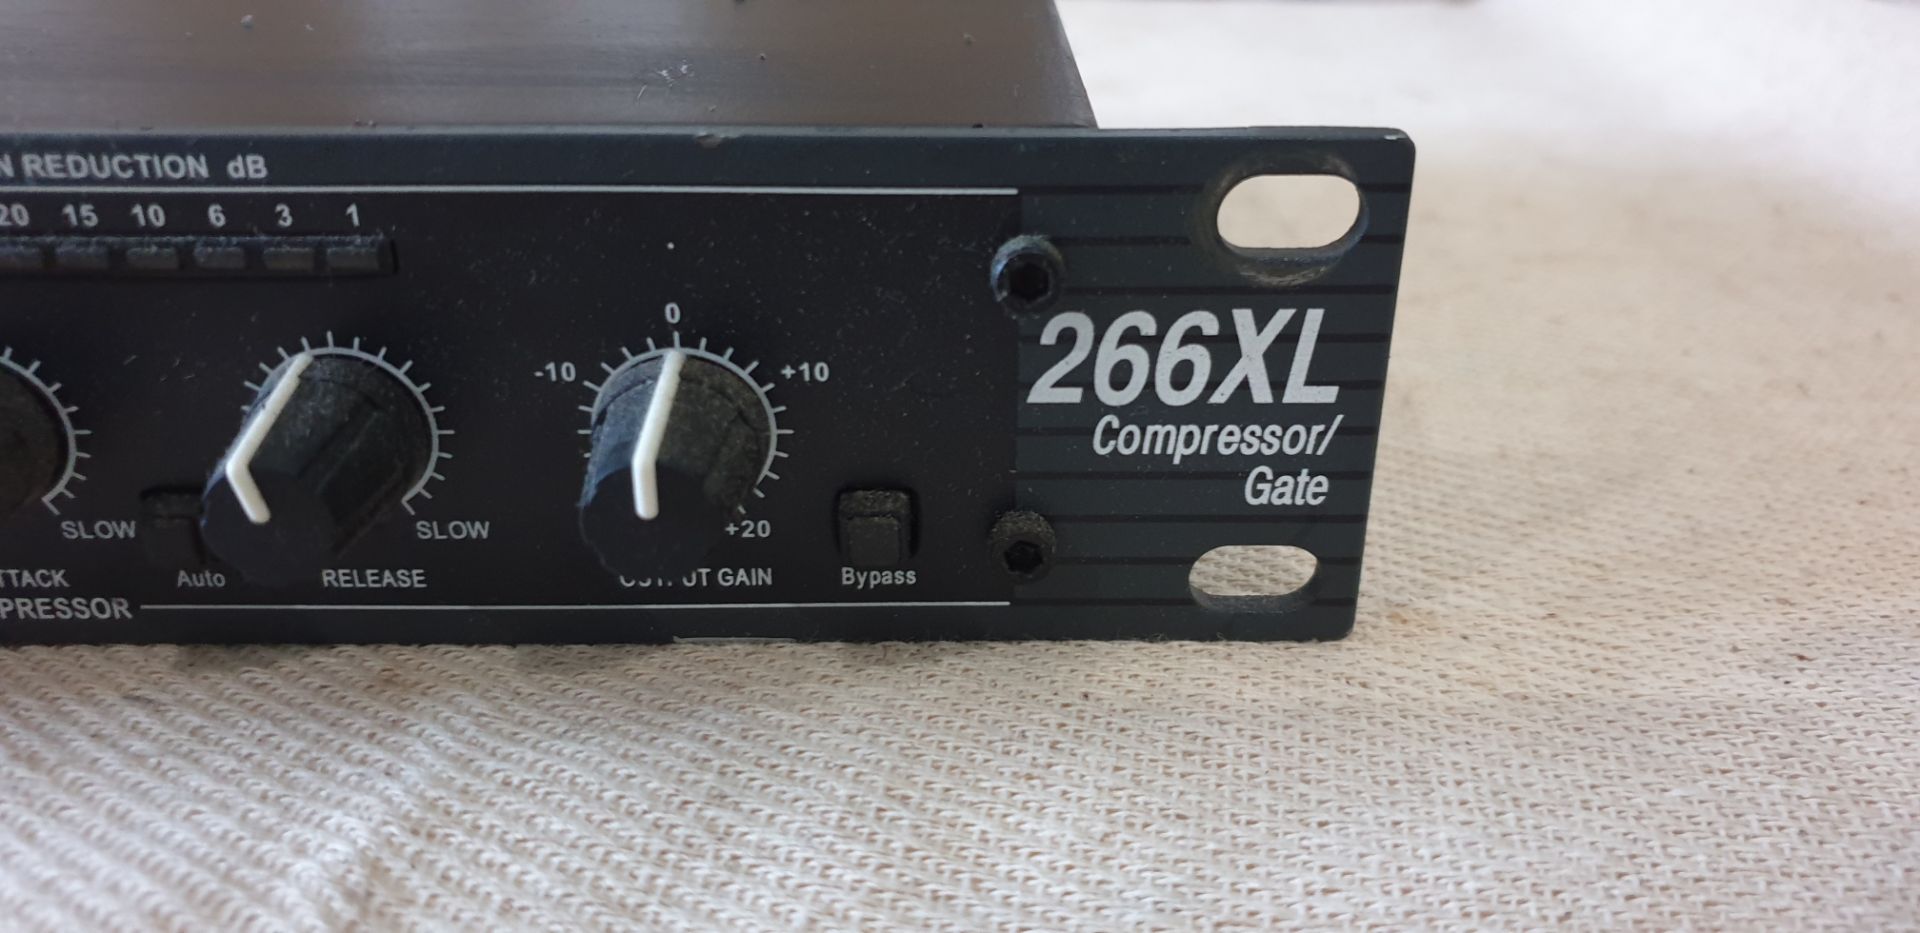 1 ; DBX Professional Products 266 XL Compressor / Gate - Image 2 of 3